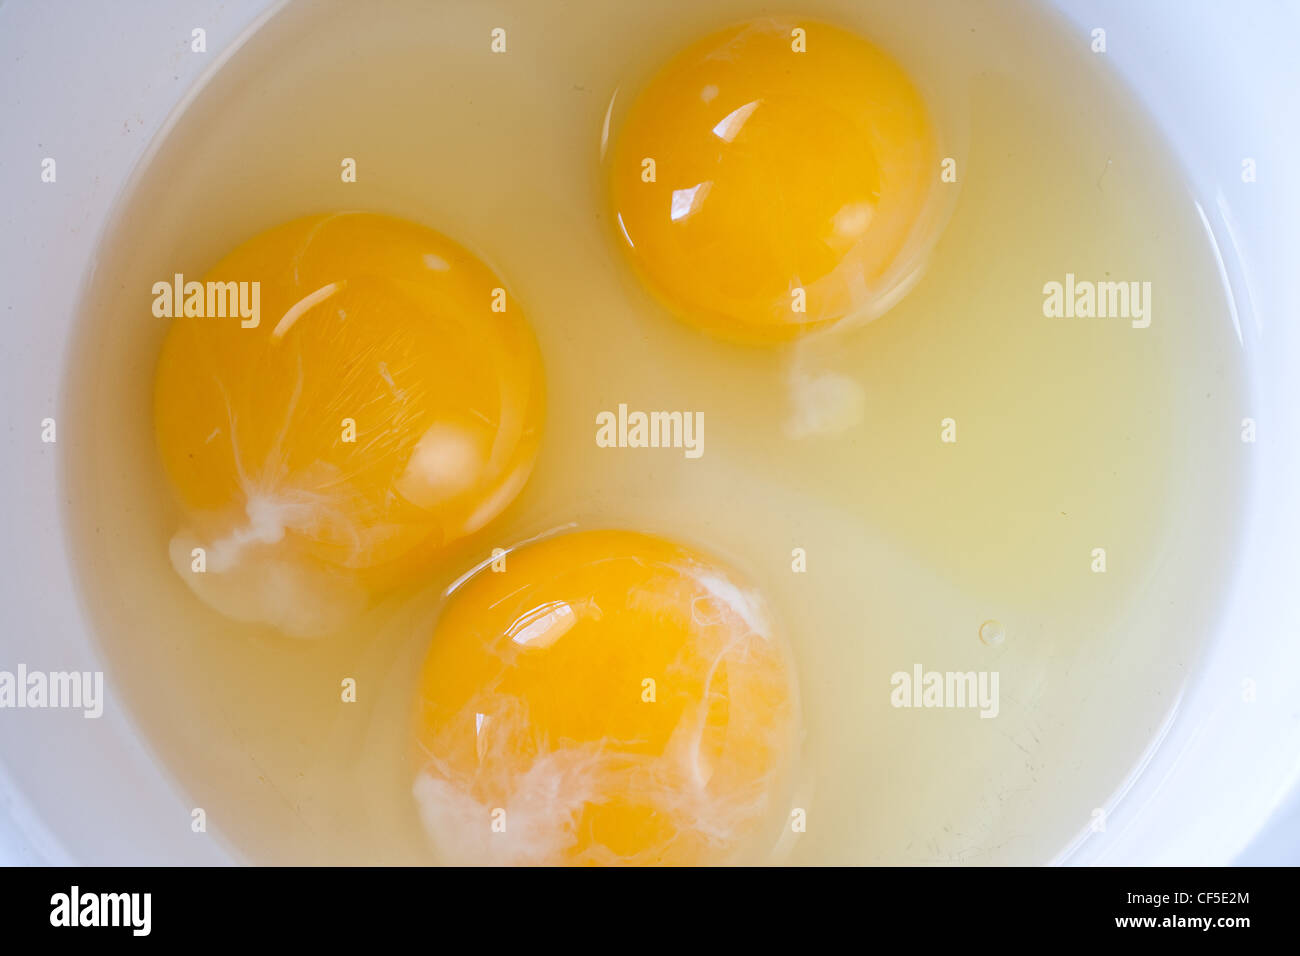 Uncooked eggs in a bowl Stock Photo